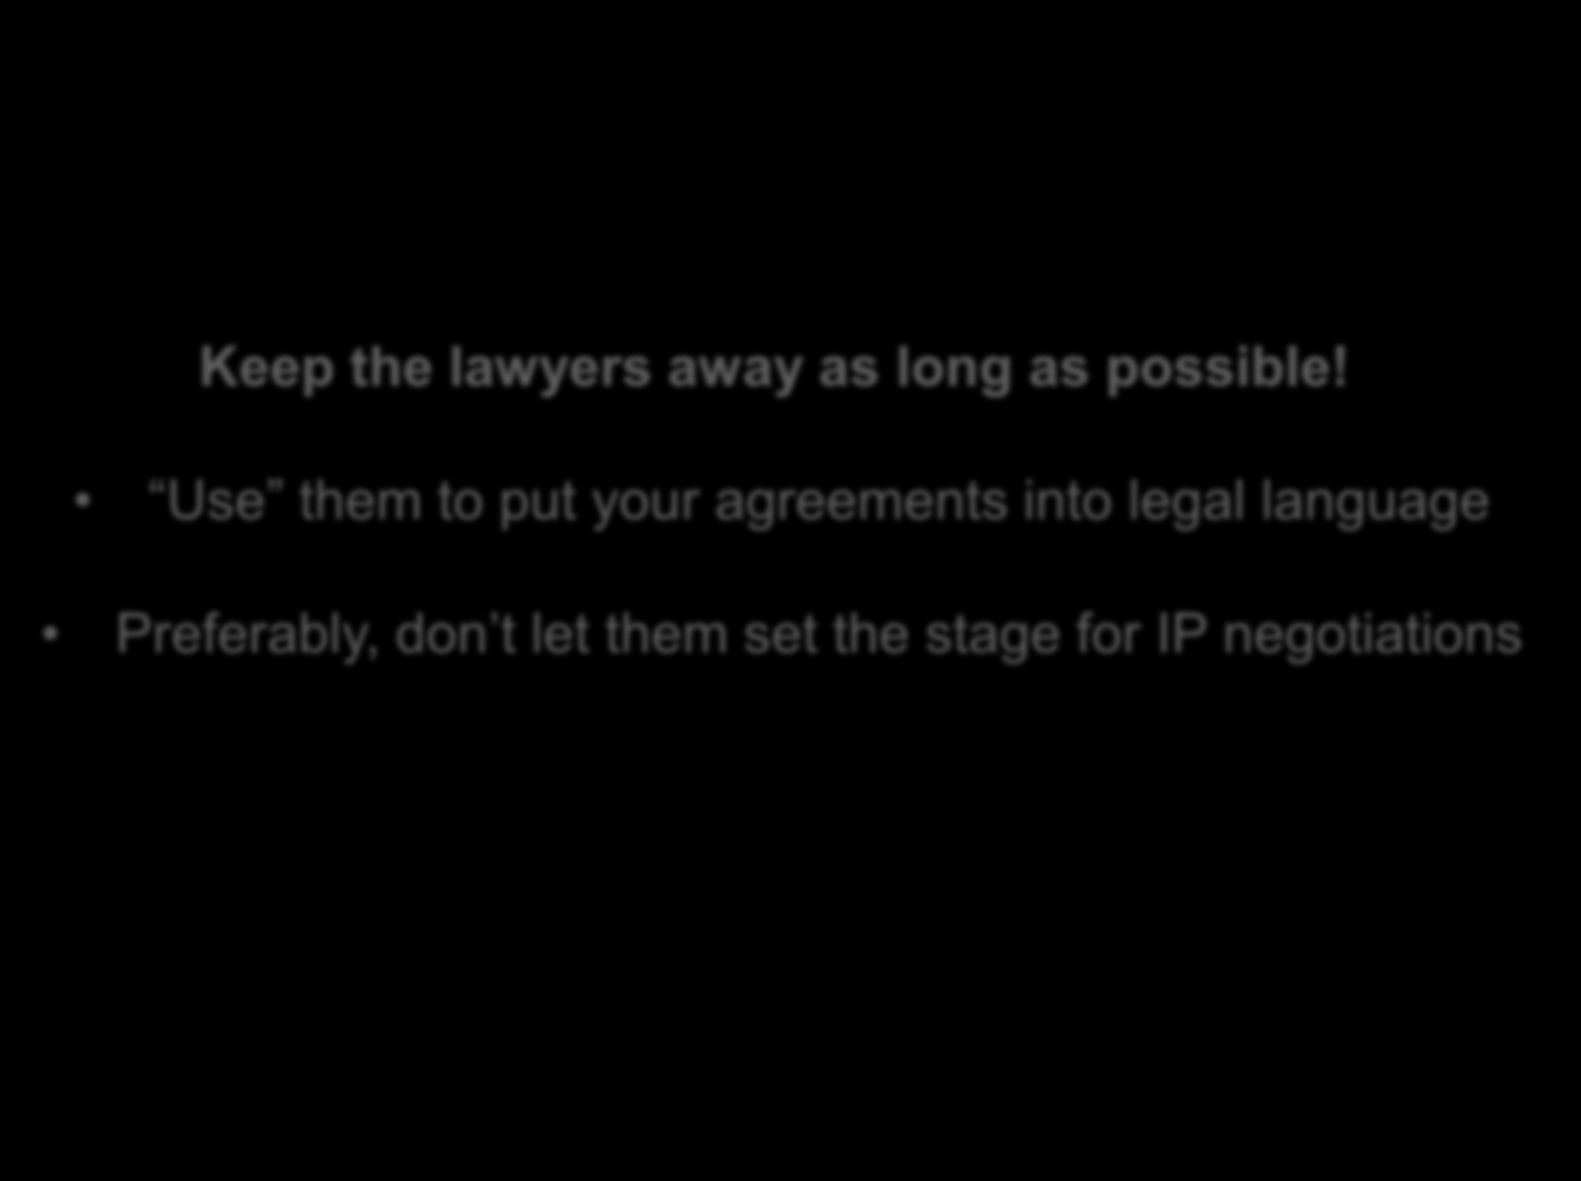 (On)terecht advies Keep the lawyers away as long as possible!